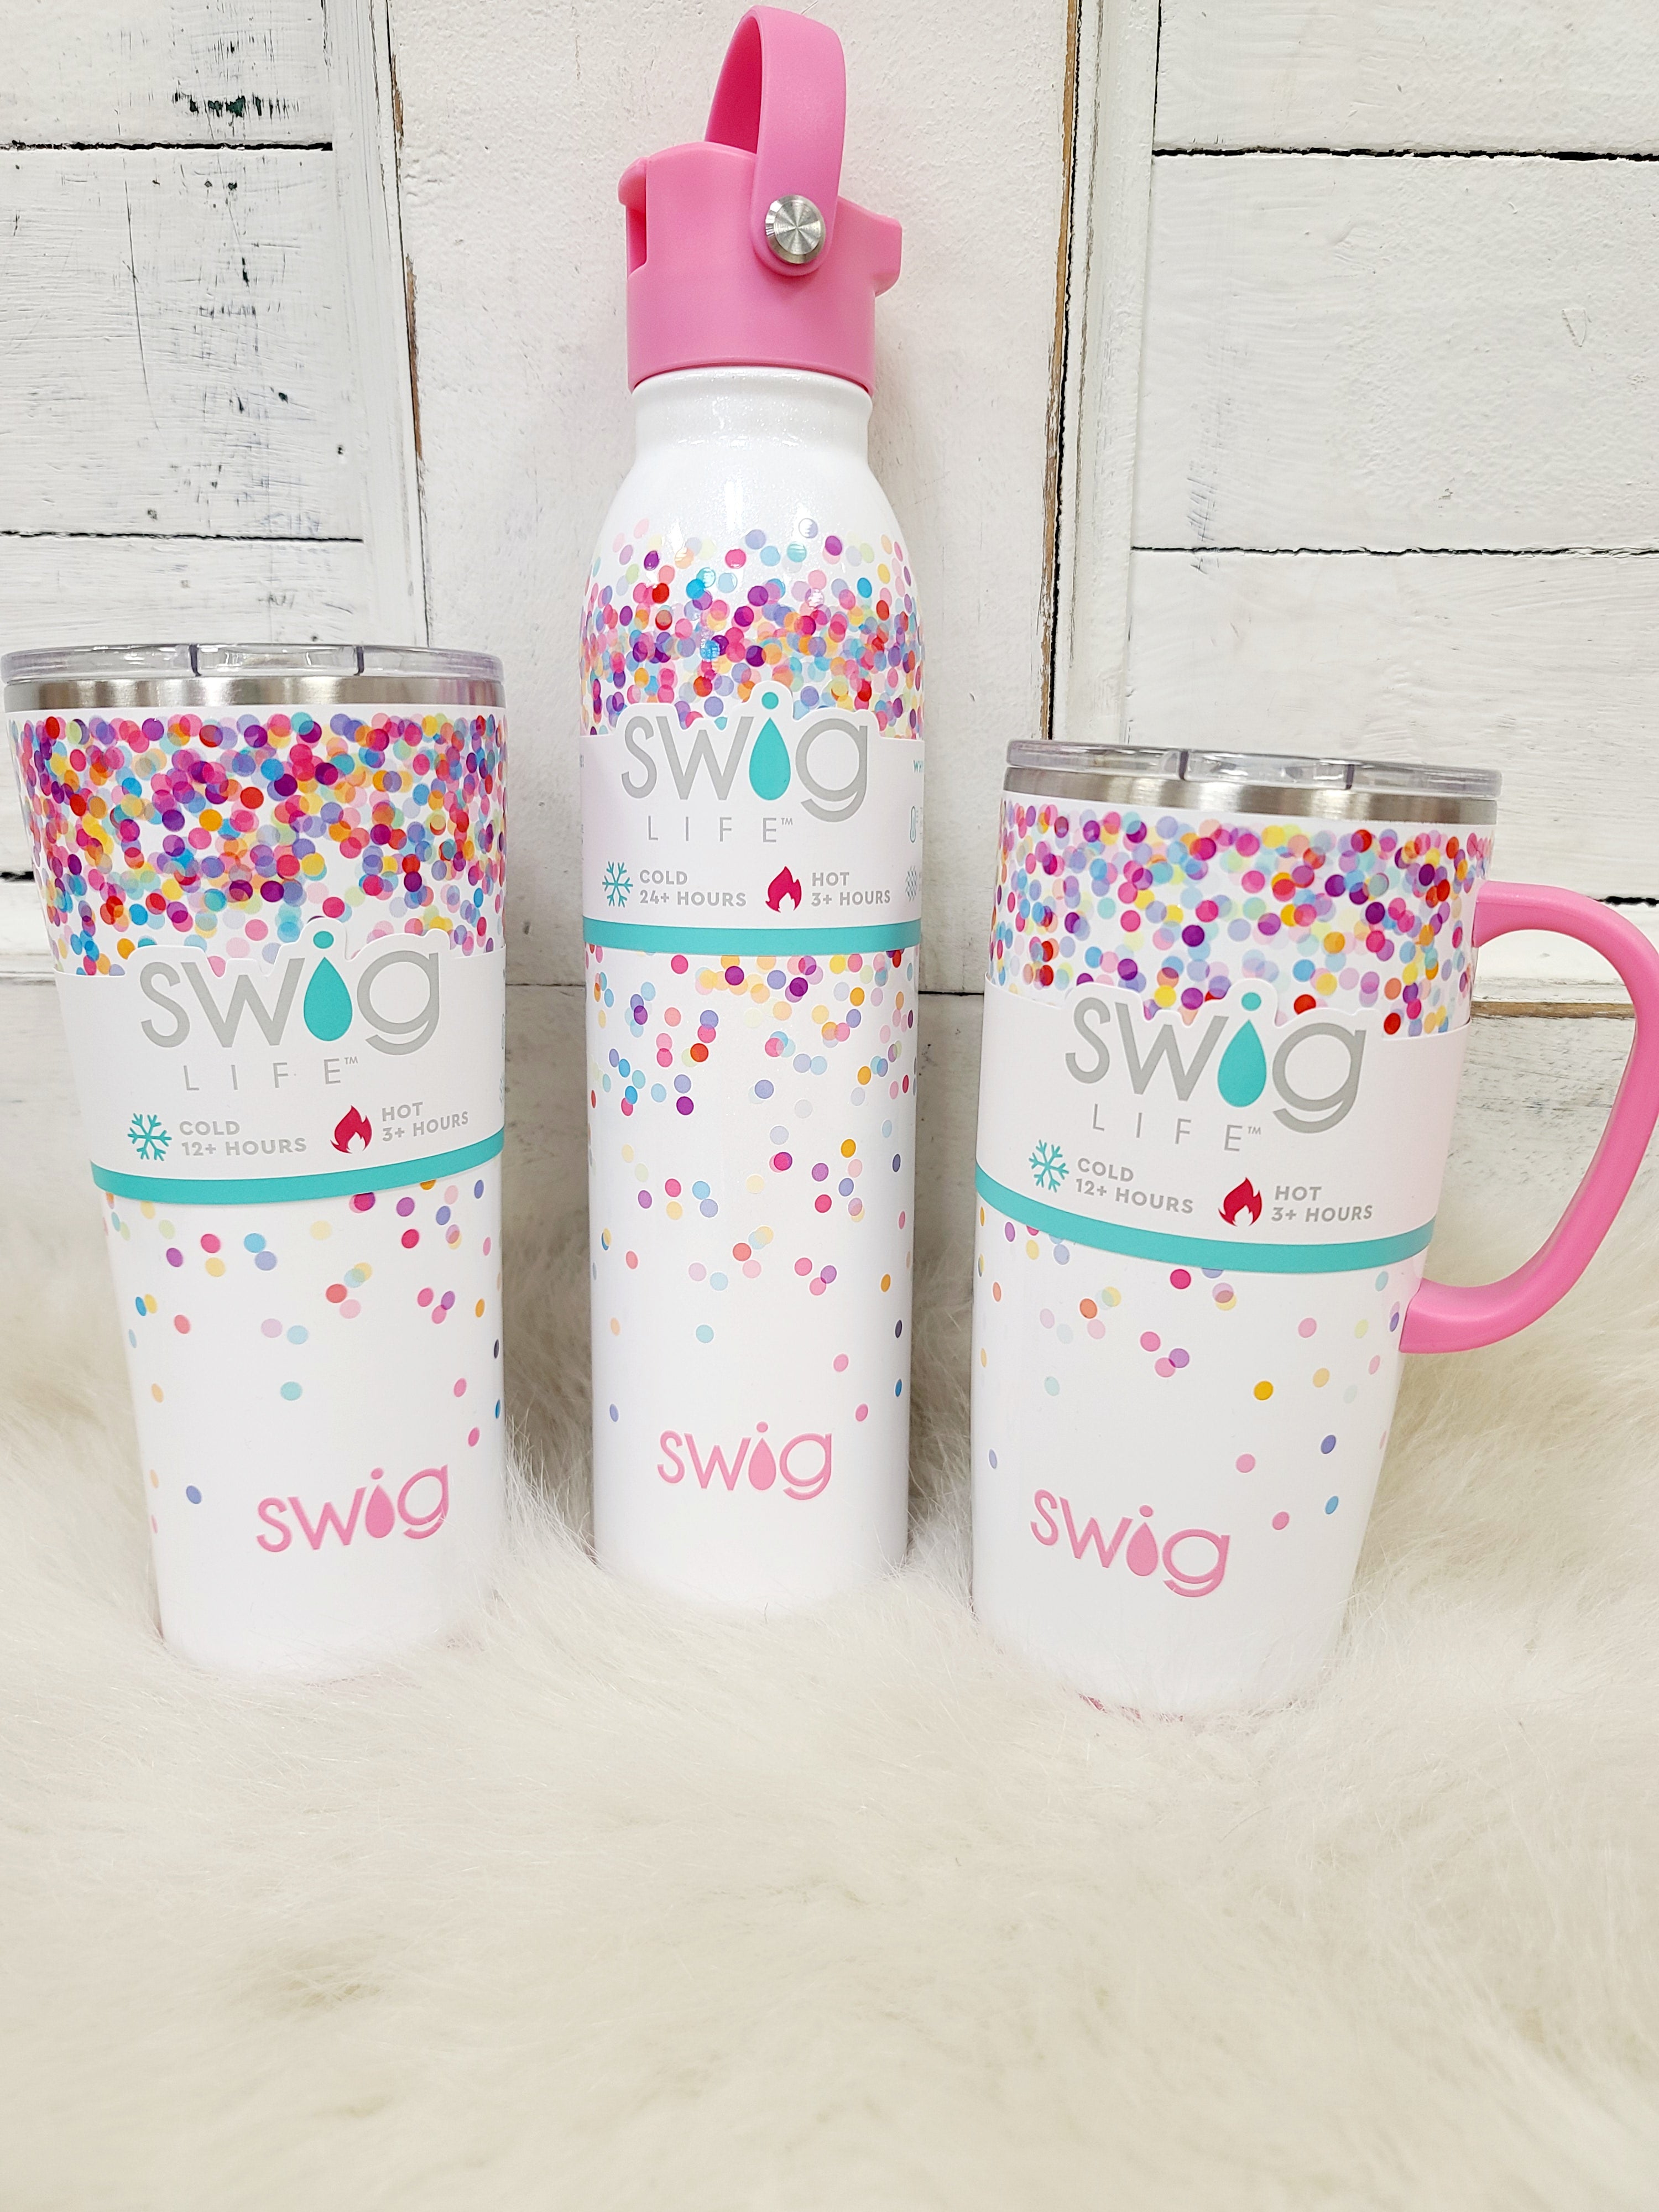 Swig Life Travel Mug with Handle - Electric Slide Insulated Stainless Steel - 22oz - Dishwasher Safe with A Non-Slip Base